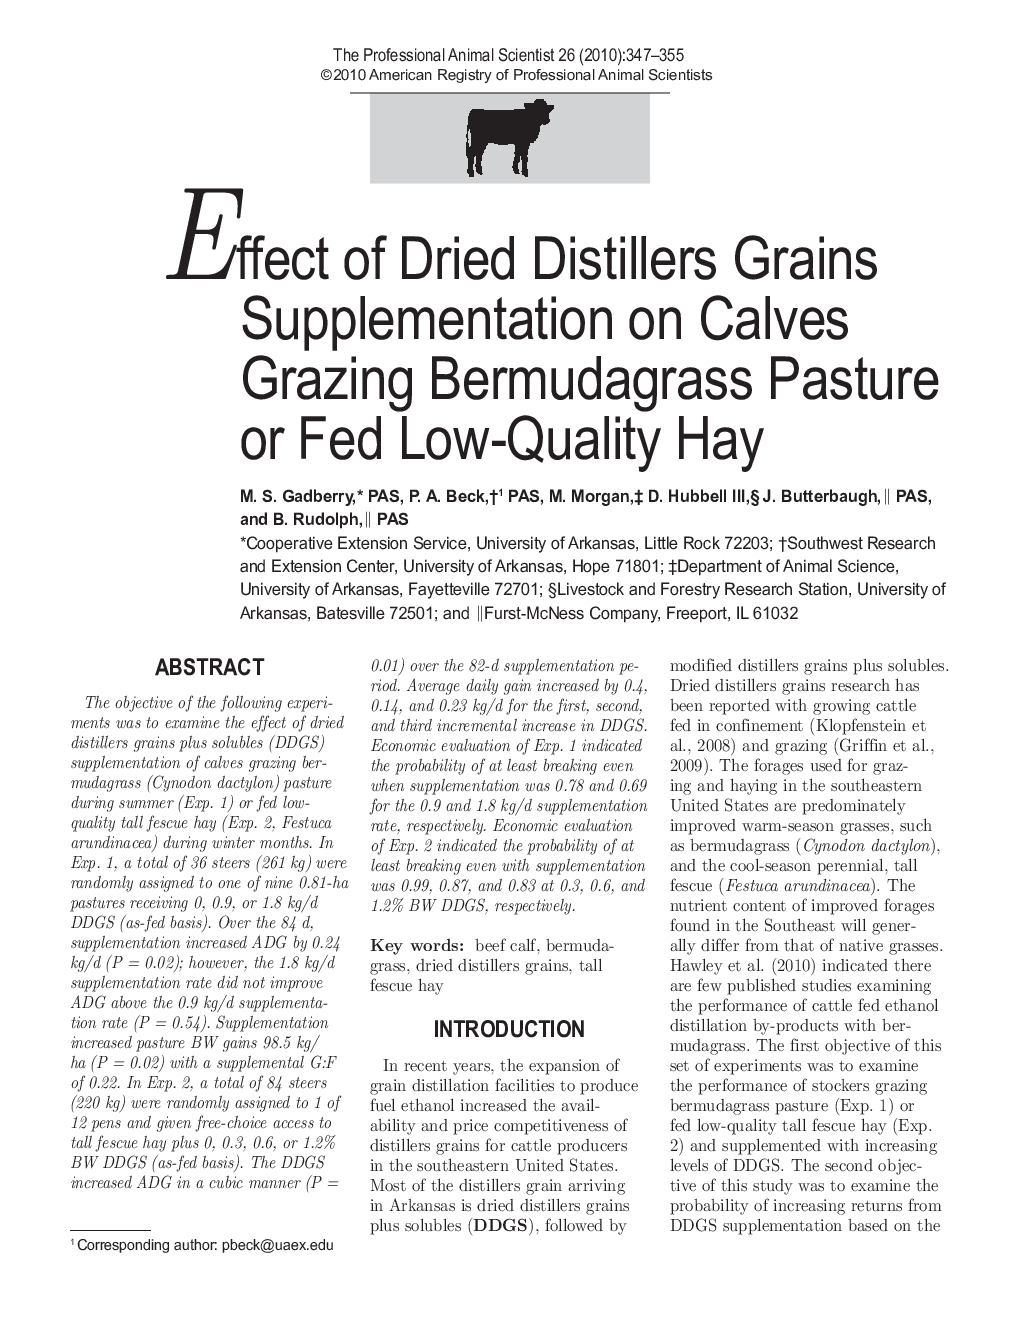 Effect of Dried Distillers Grains Supplementation on Calves Grazing Bermudagrass Pasture or Fed Low-Quality Hay